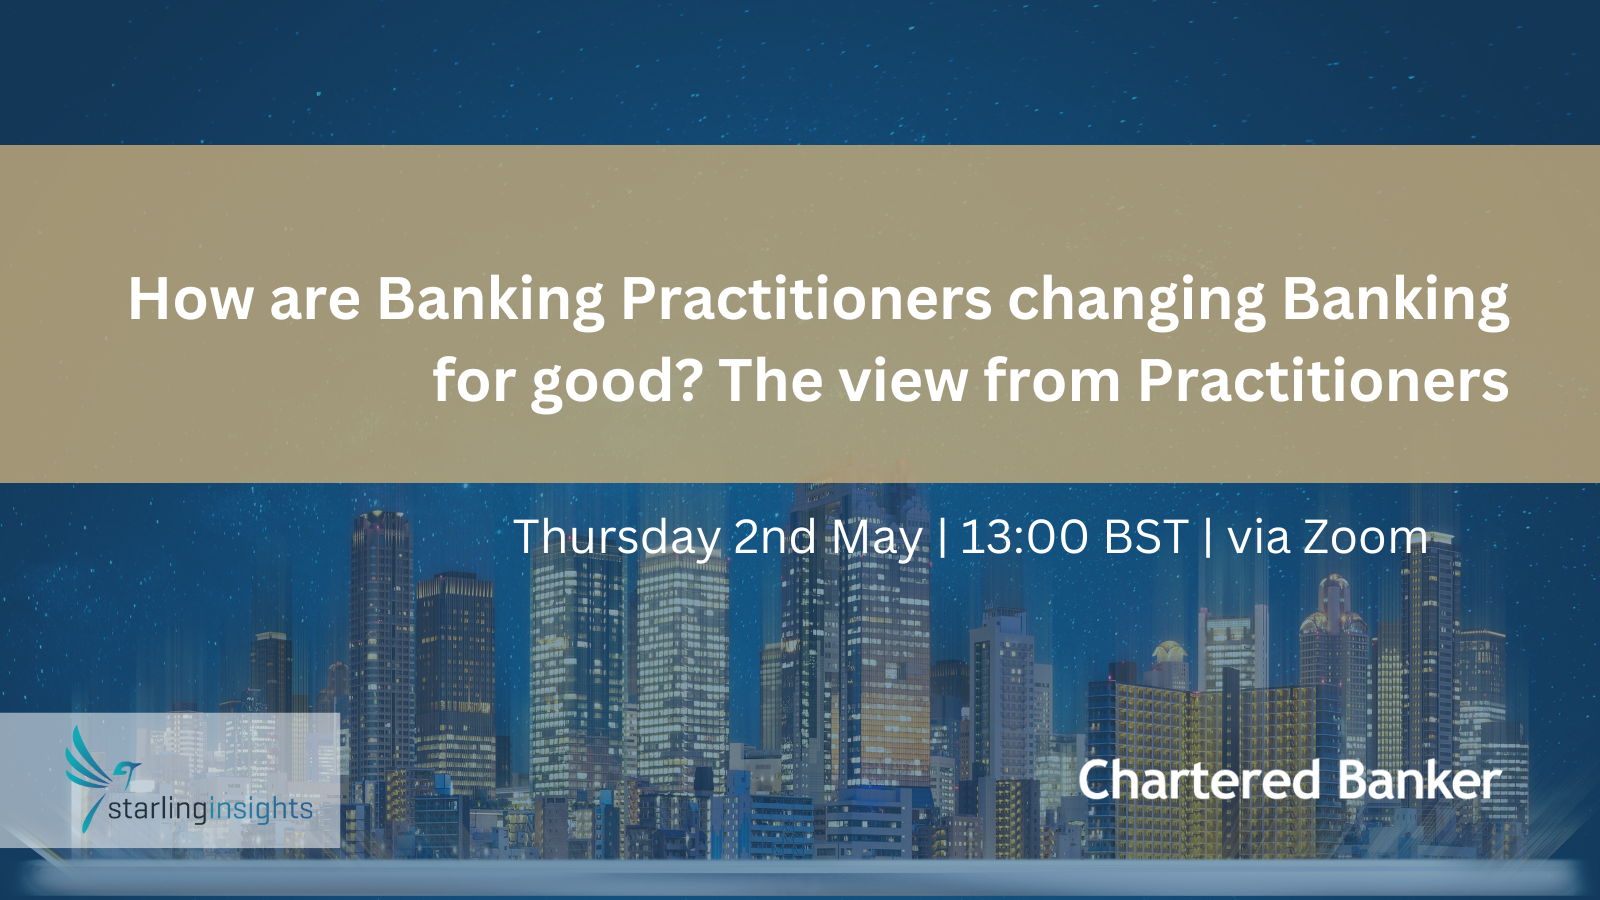 How are Banking Practitioners changing Banking for good? The view from Practitioners